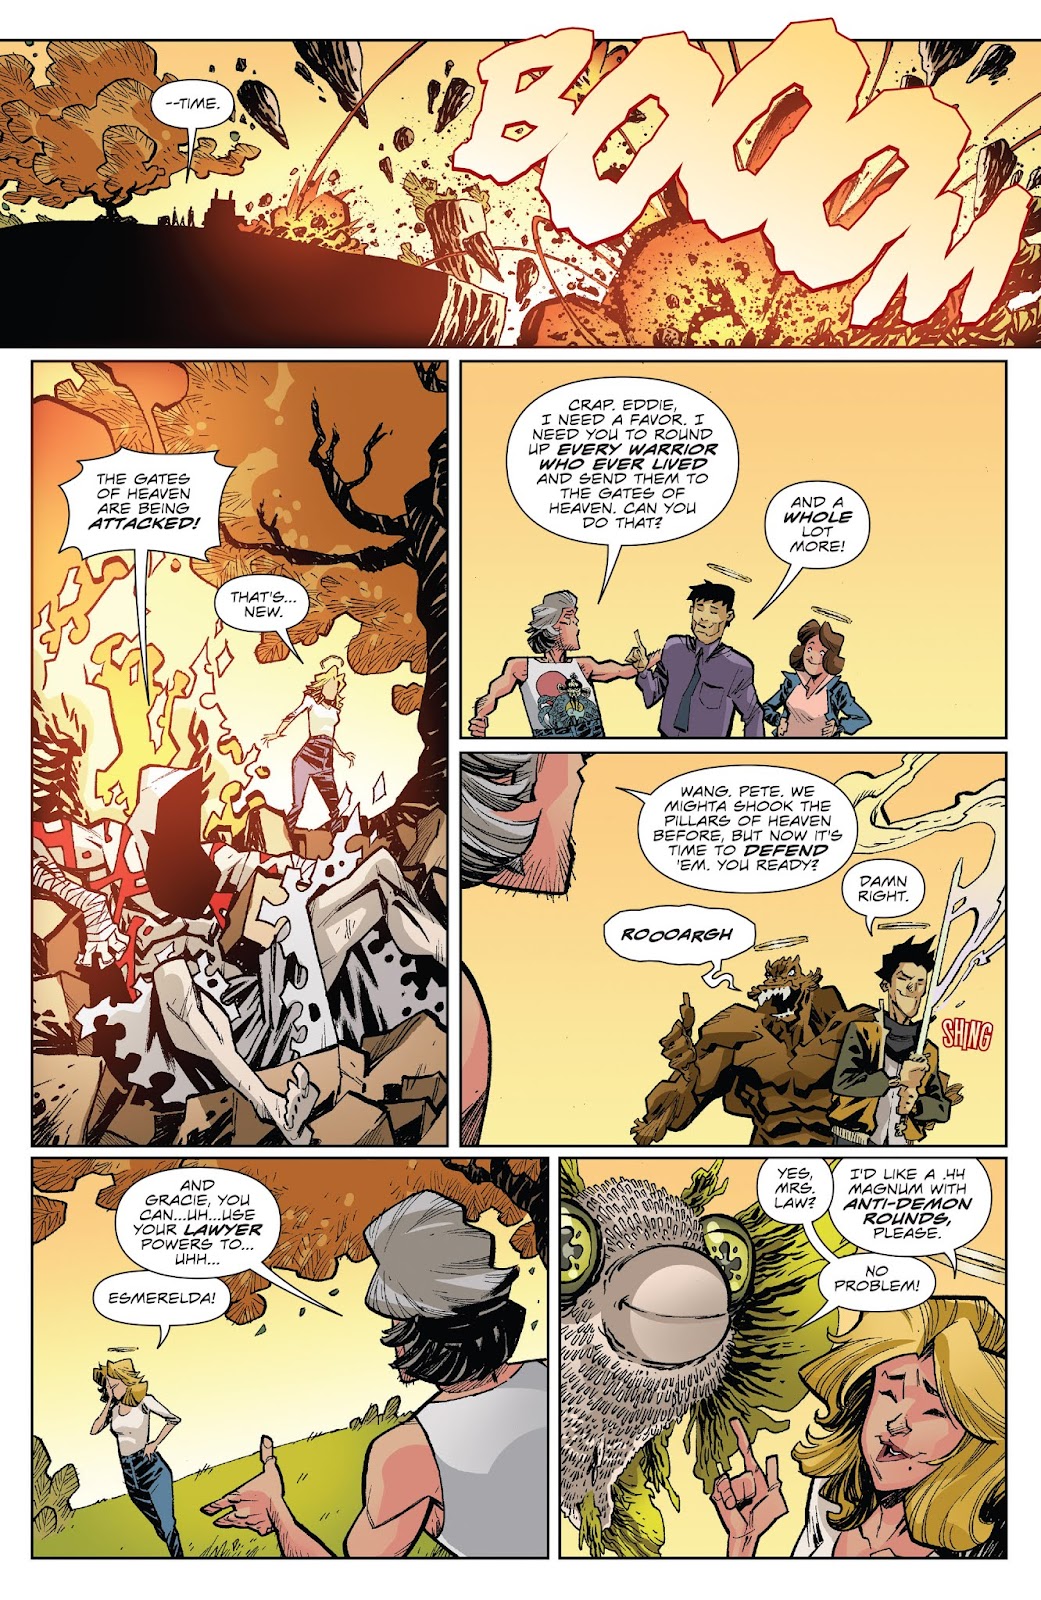 Big Trouble in Little China: Old Man Jack issue 11 - Page 6